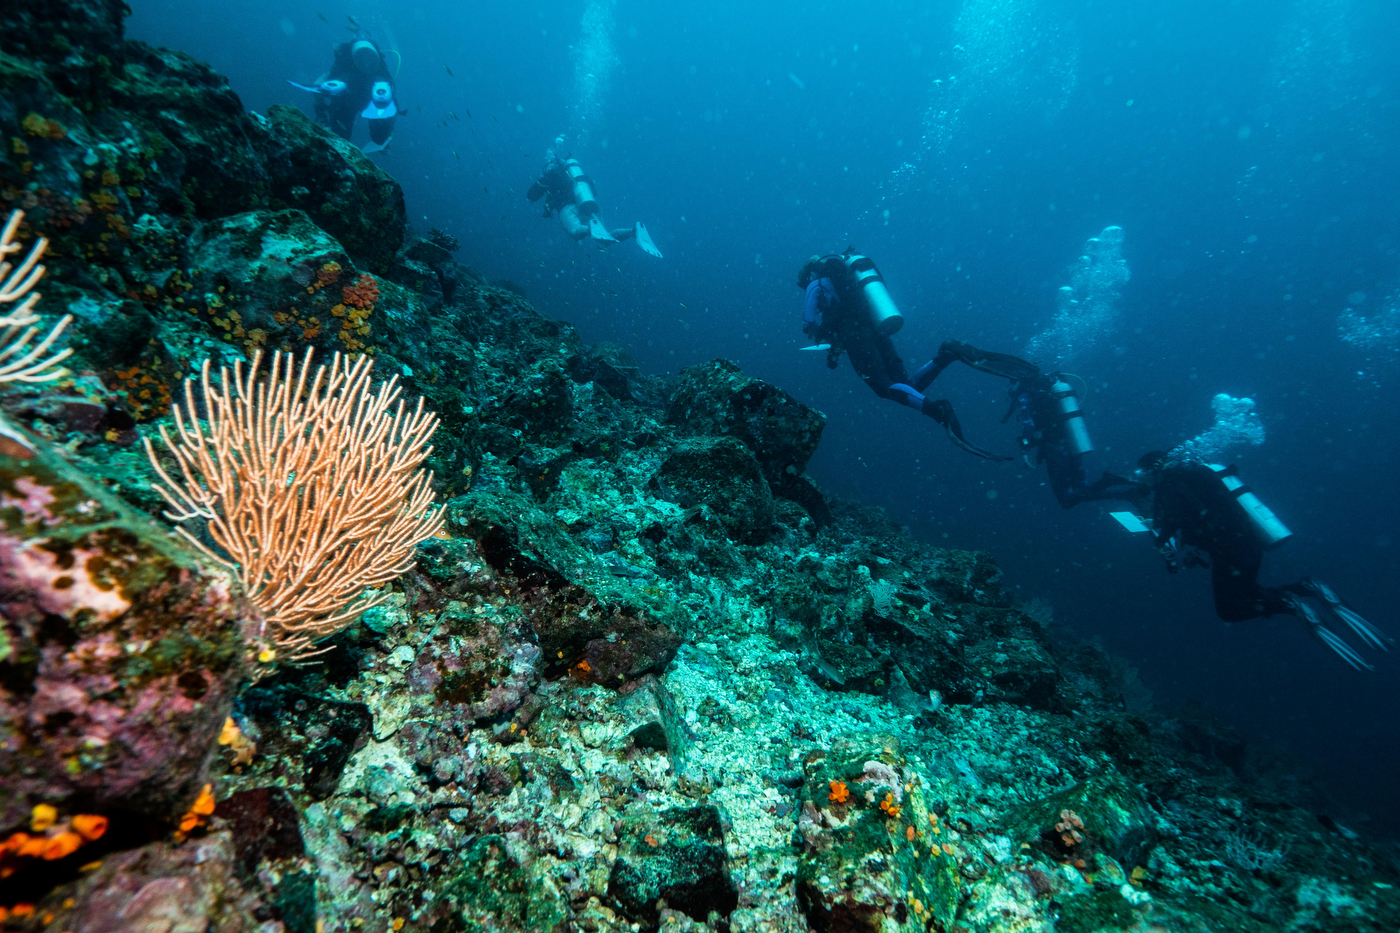 Stony coral tissue loss disease is sweeping through Caribbean reefs. Can these students find the answers?